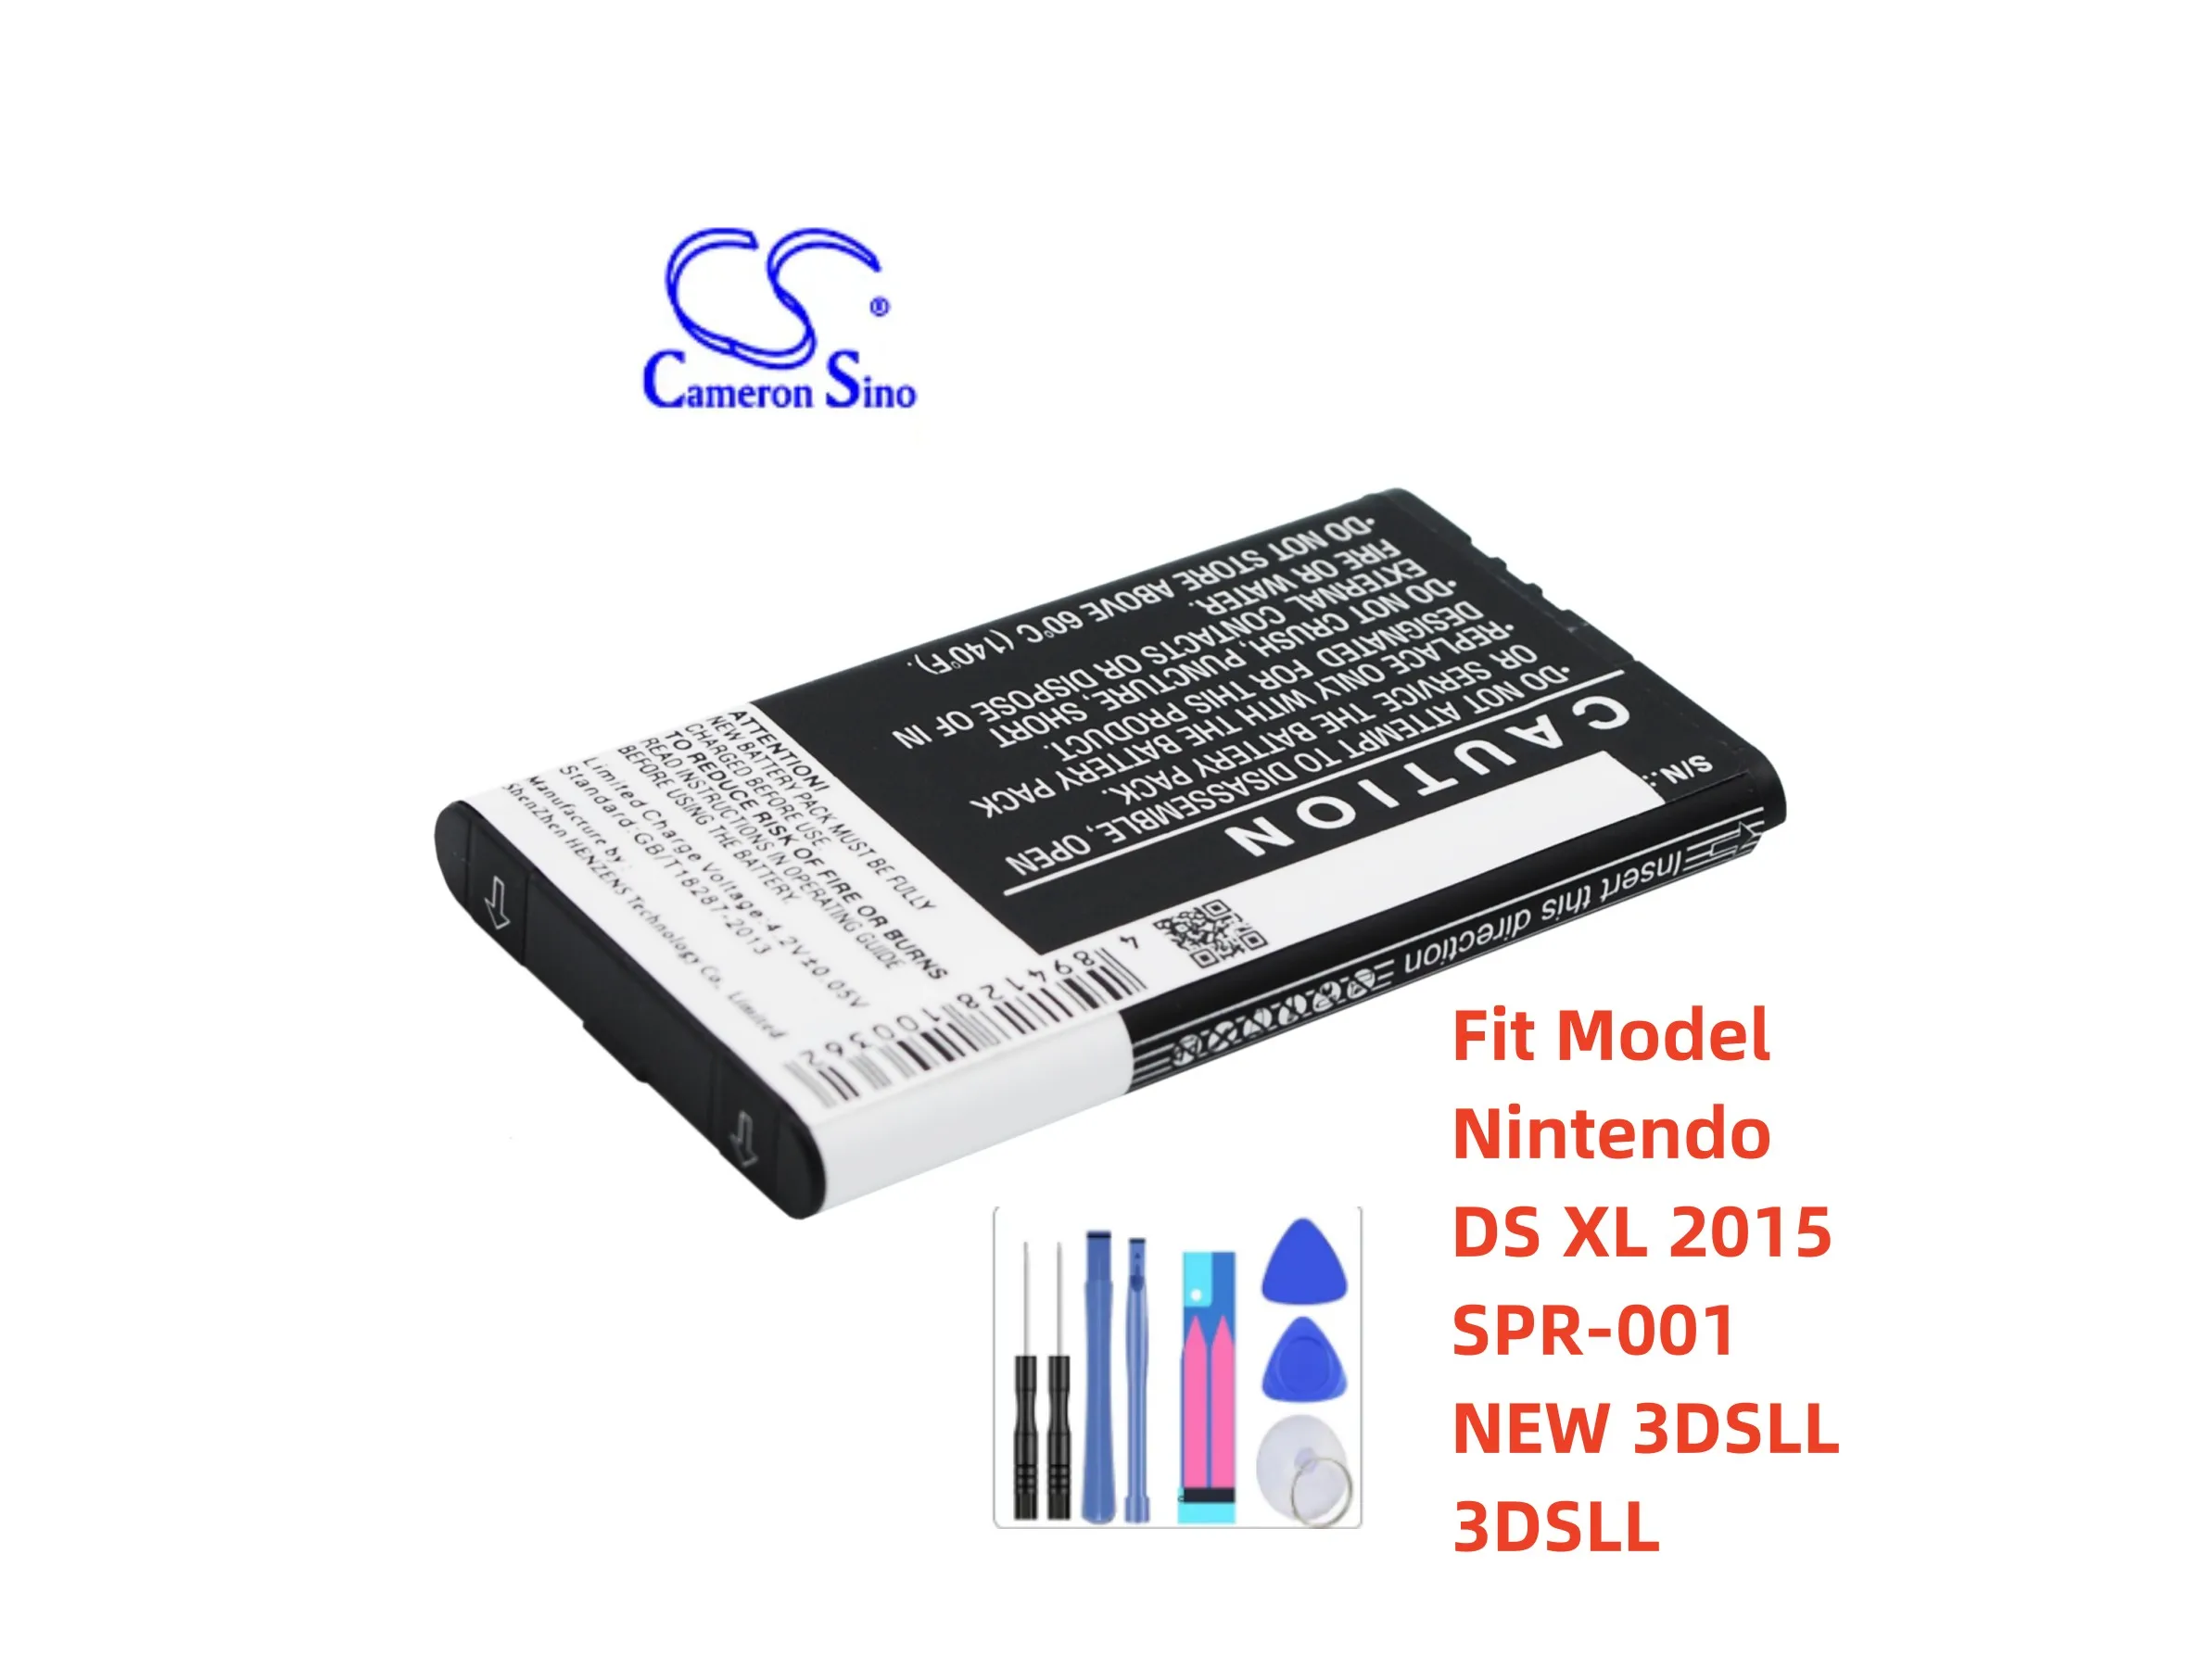 

Cameron Sino 1800mAh Battery SPR-003, SPR-A-BPAA-CO for Nintendo DS XL 2015, SPR-001, NEW 3DSLL, 3DSLL, 3DS LL, DSXL 2015